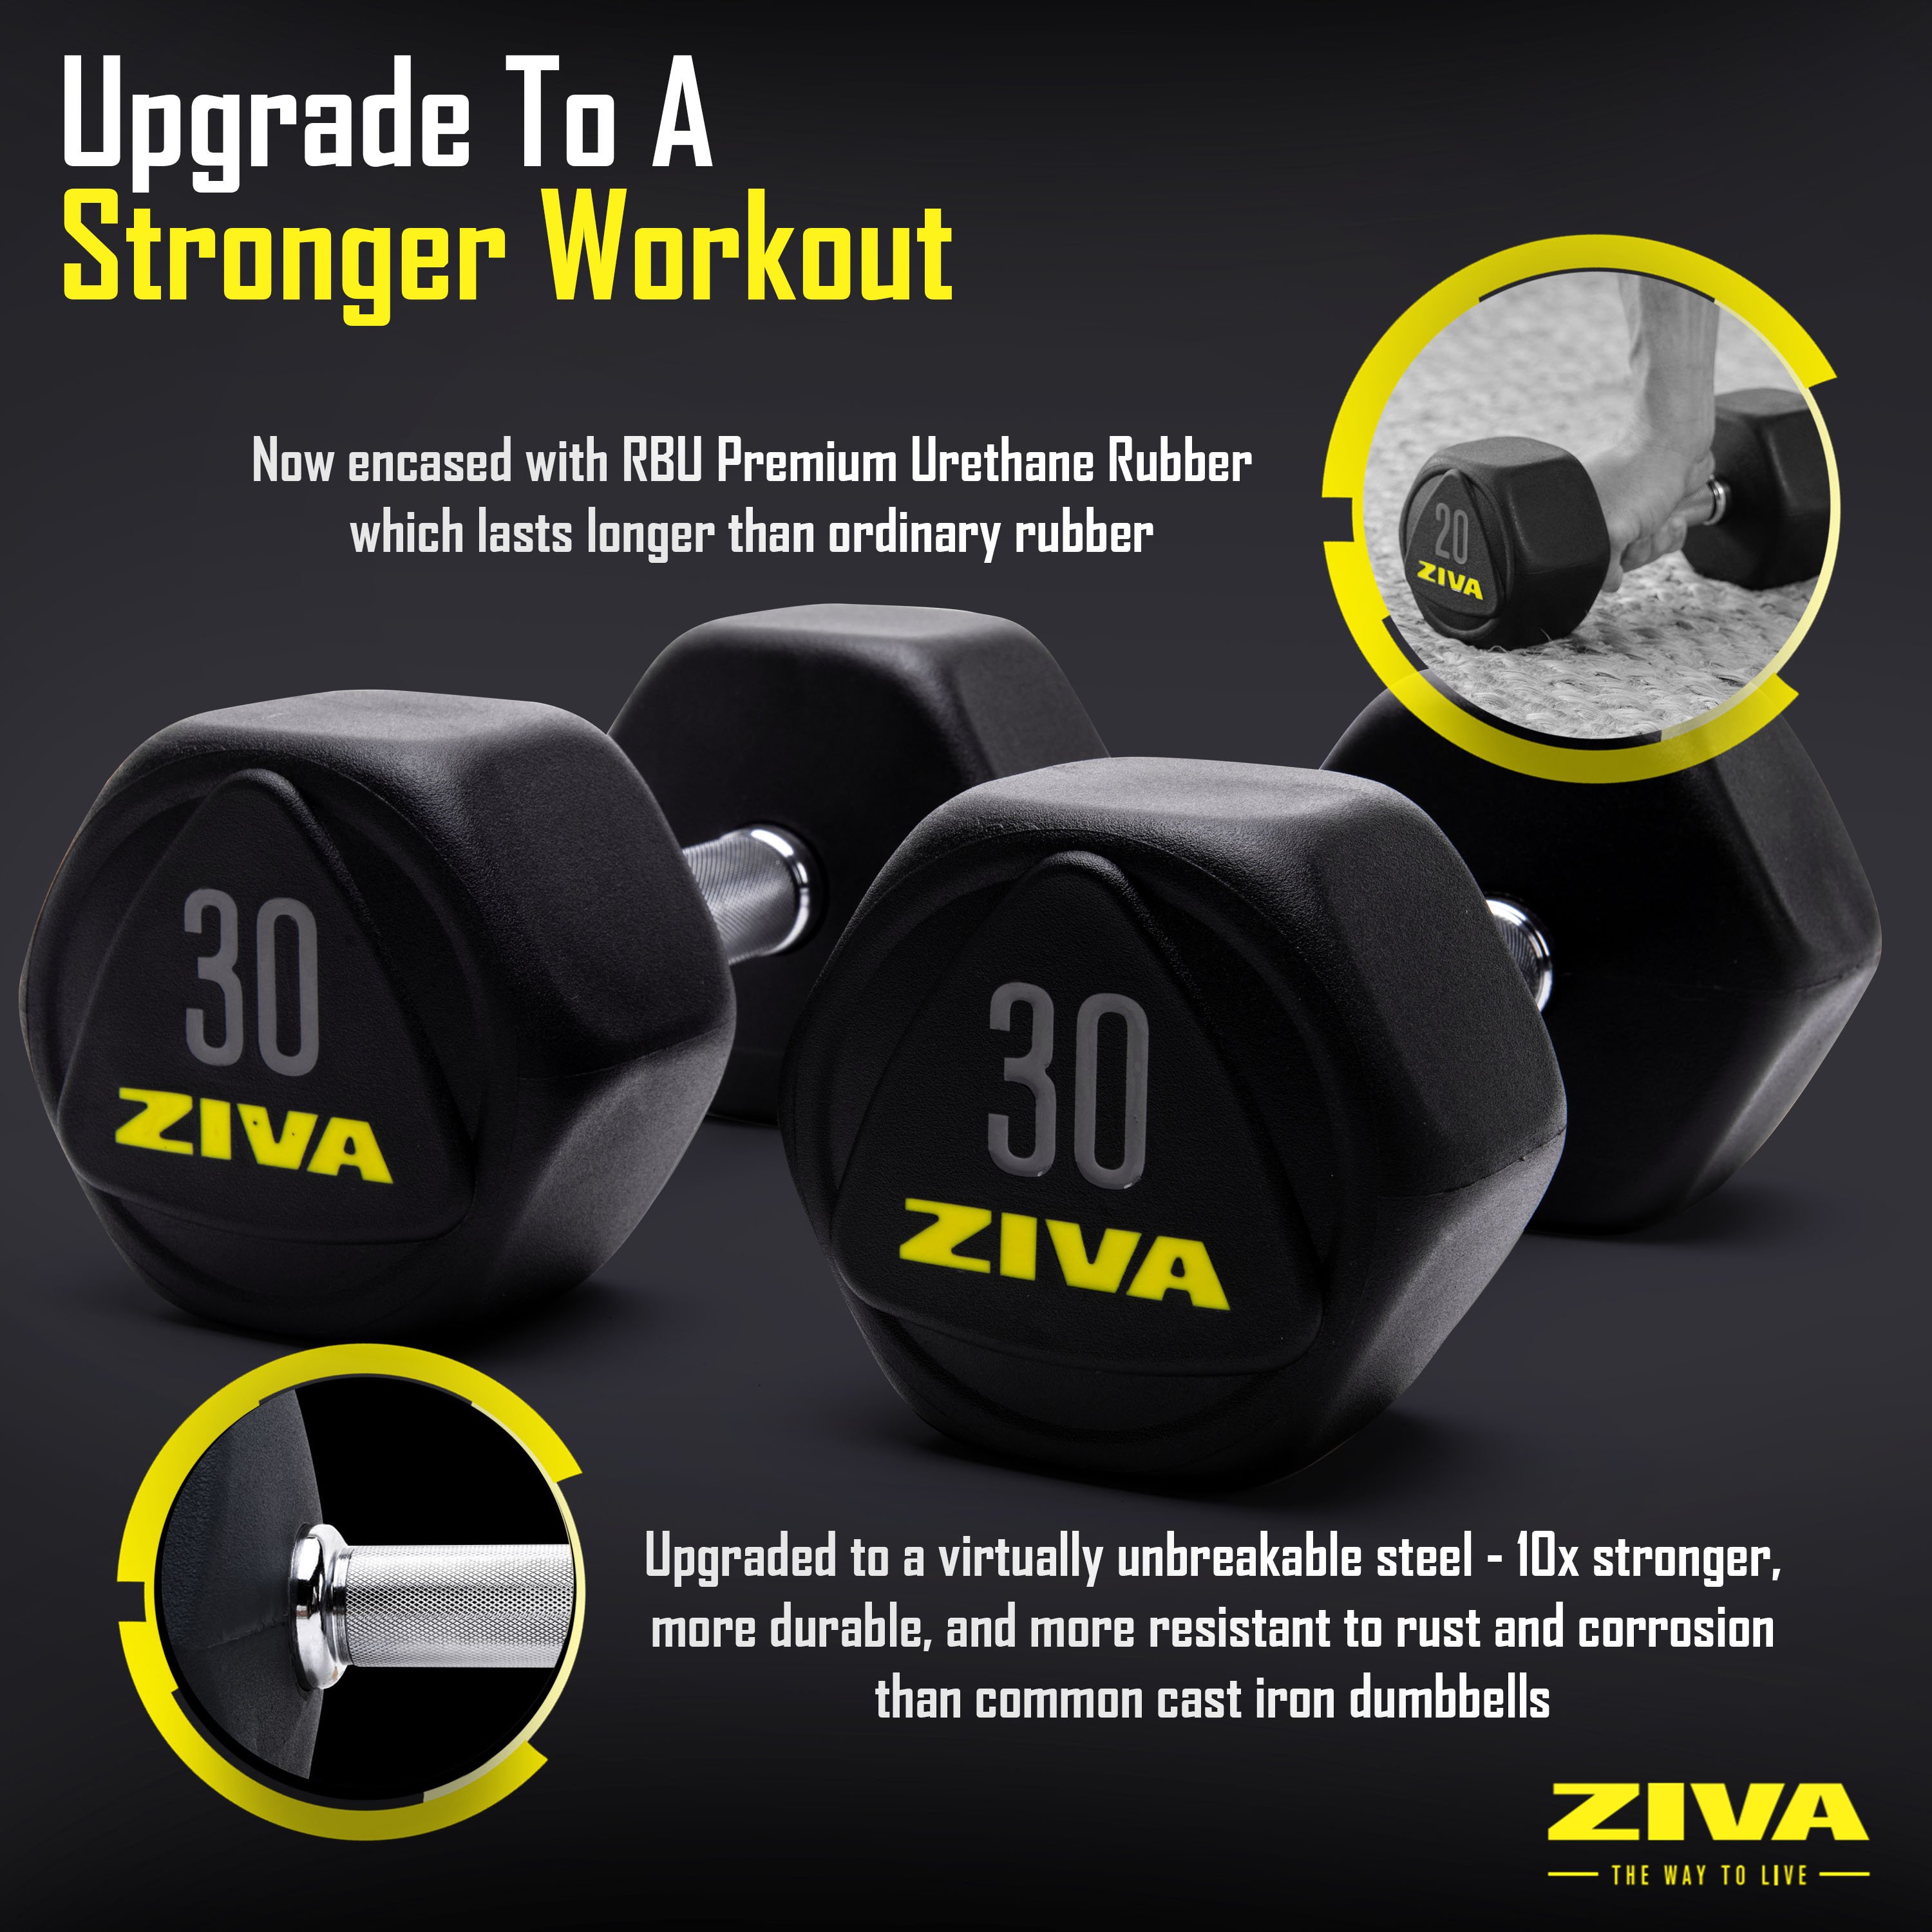 Upgrade to a stronger workout. Now encased with RBU premium urethane rubber which lasts longer than ordinary rubber. Upgraded to a virtually unbreakable steel - 10x stronger, more durable, and more resistant to rust and corrosion than common cast iron dumbbells.